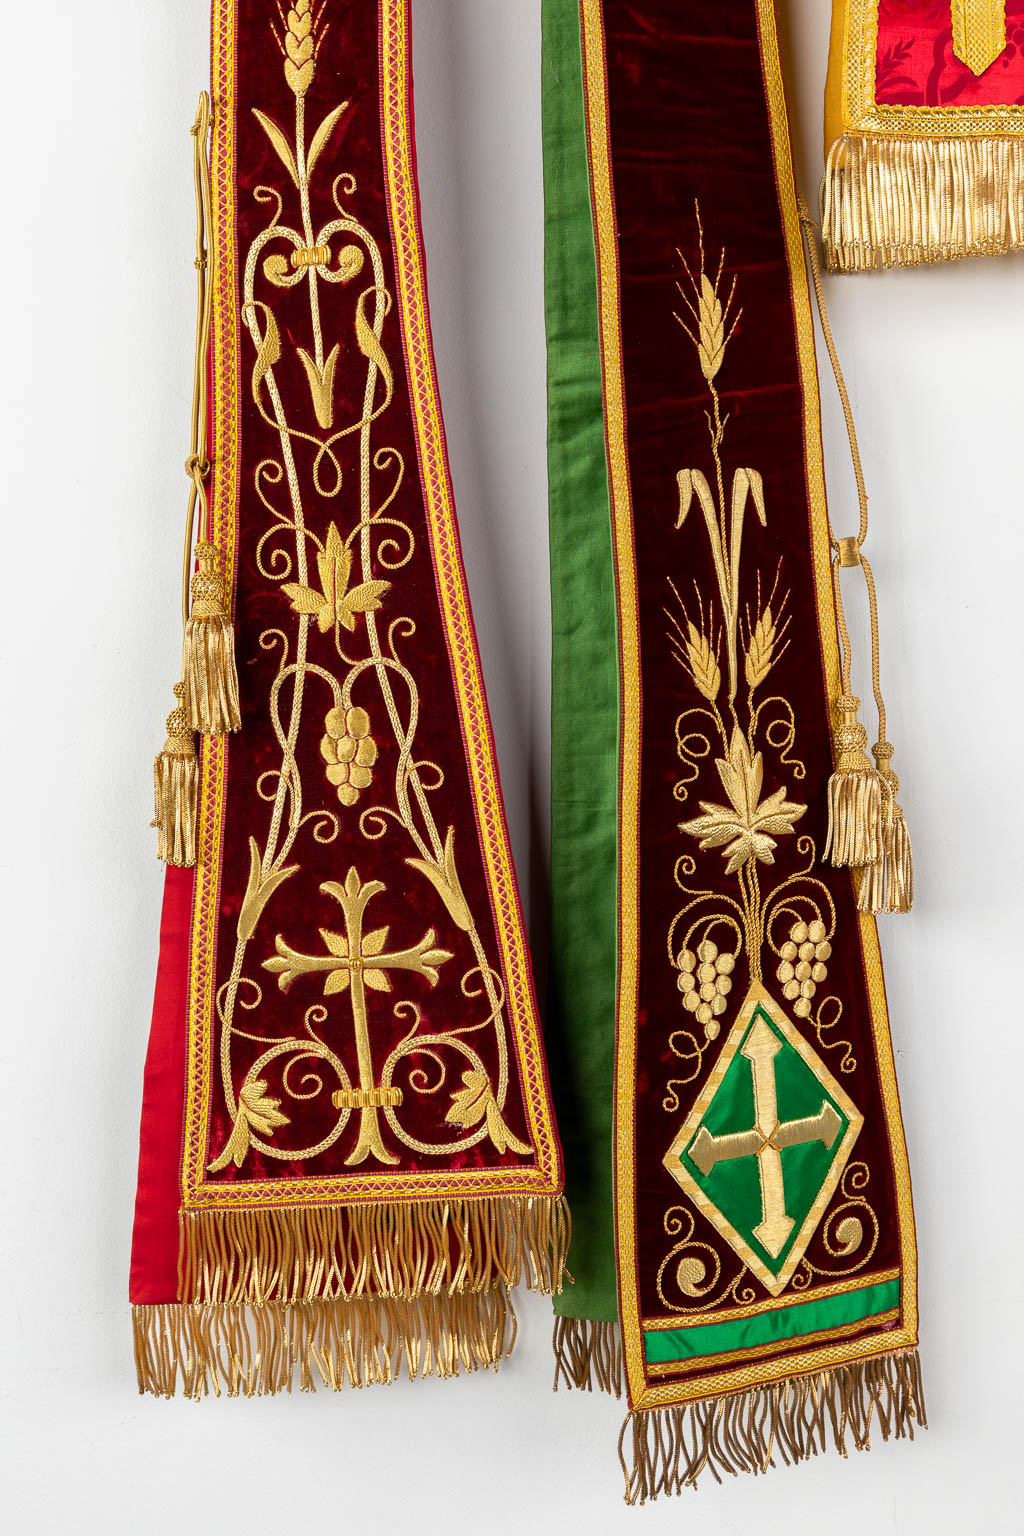 Four Roman Chasubles, Chalice veil, Stola and Maniple, thick gold thread embroideries.